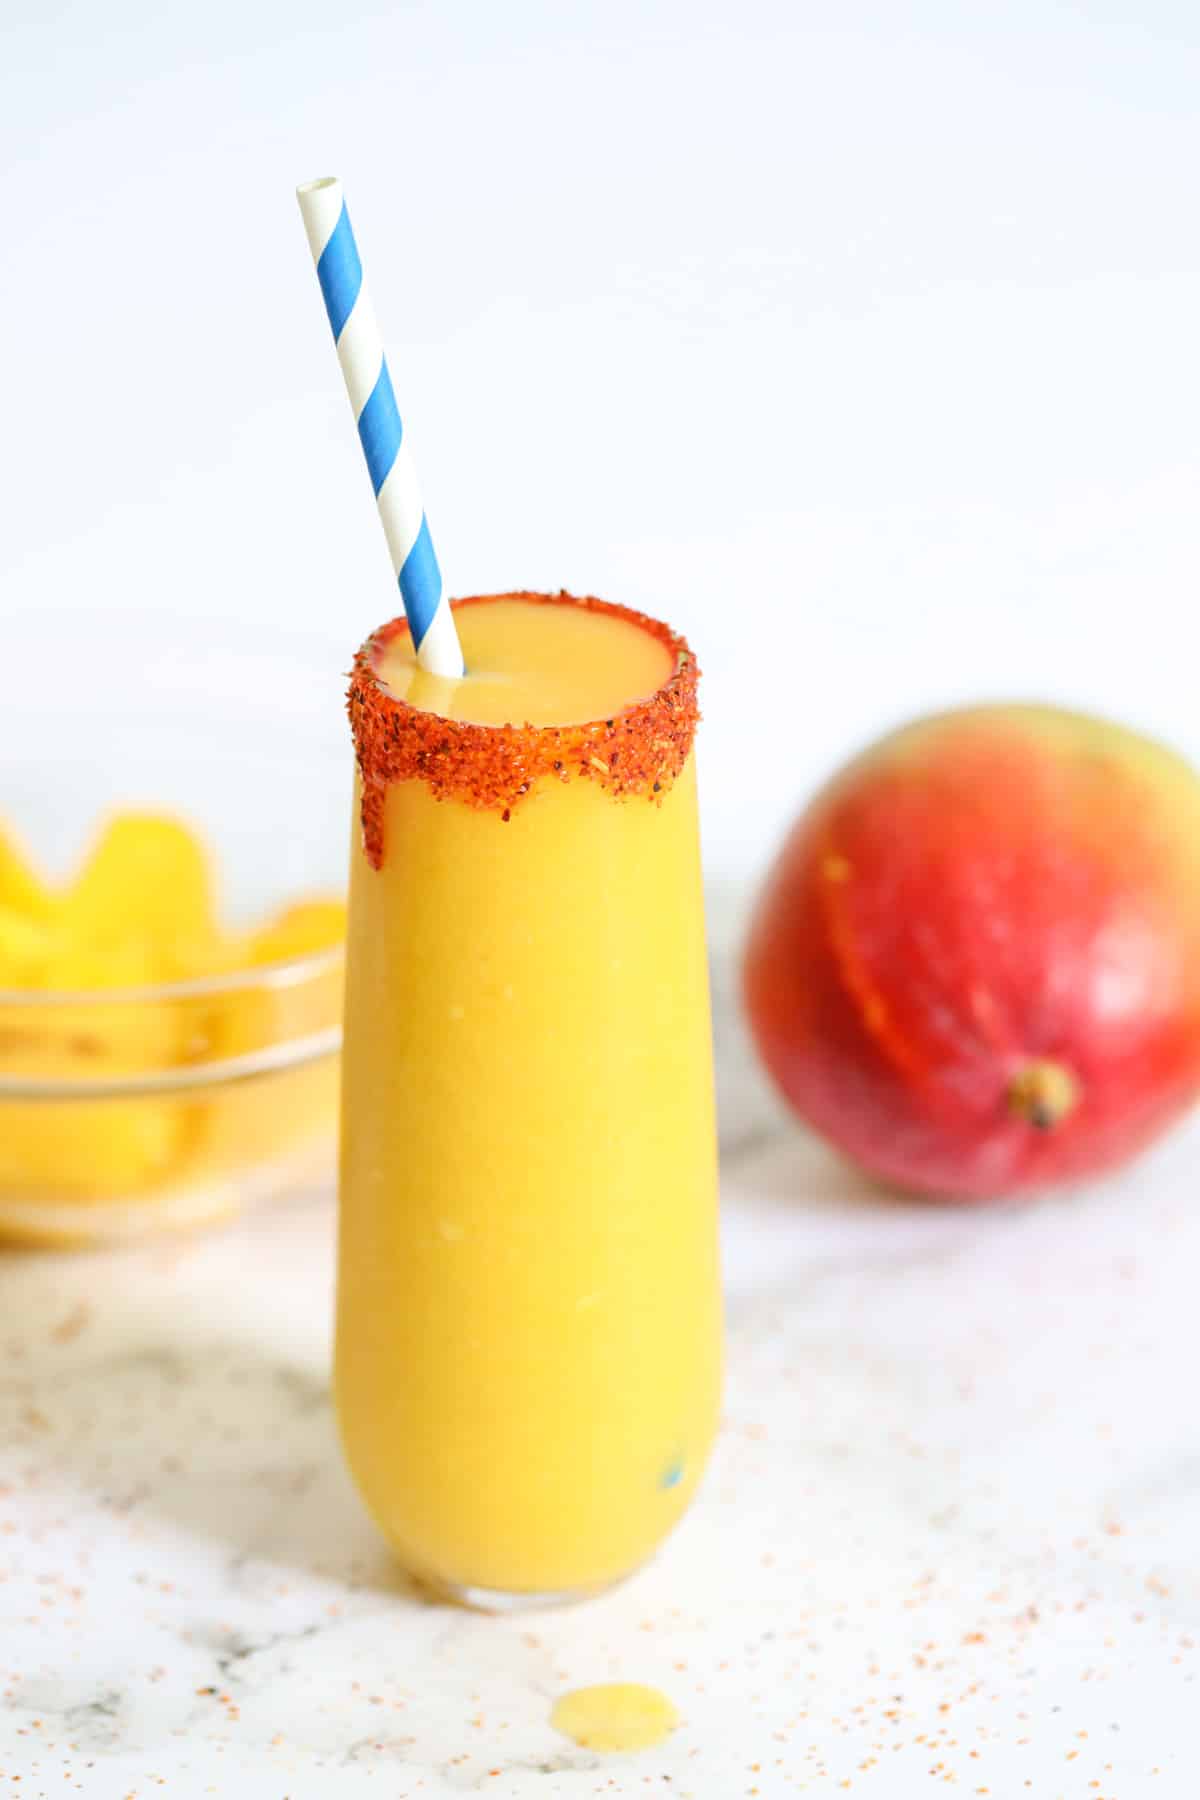 mangonada smoothie in a glass with a blue straw and a mango fruit